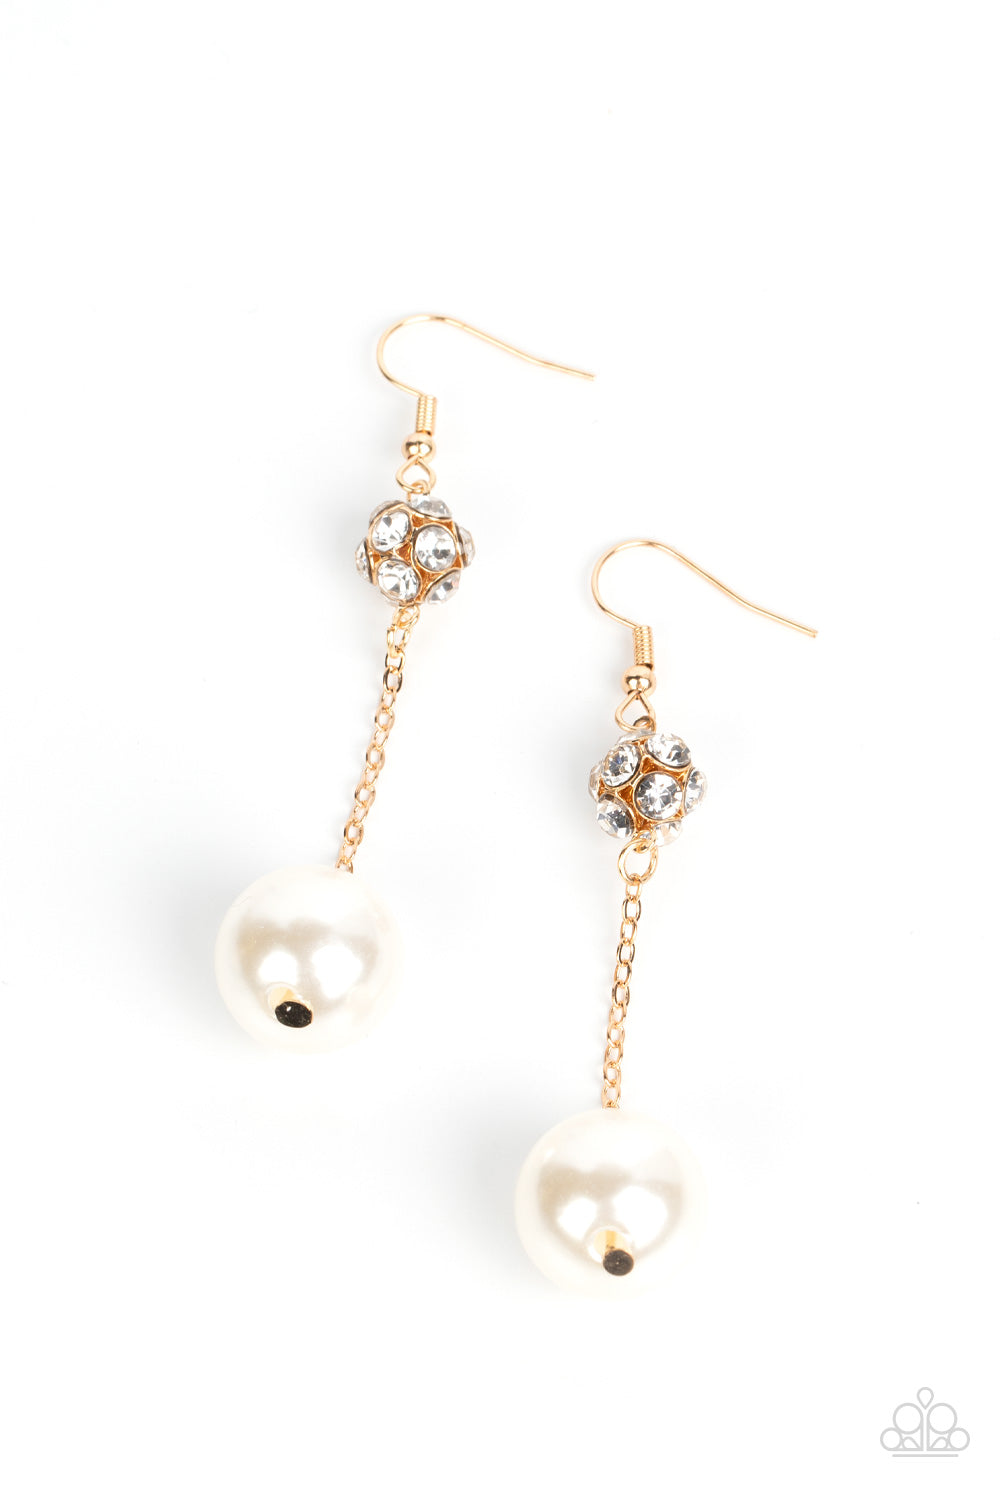 An oversized white pearl swings from the bottom of a dainty gold chain that is suspended from a white rhinestone encrusted gold bead, resulting in a timeless twist. Earring attaches to a standard fishhook fitting.  Sold as one pair of earrings.